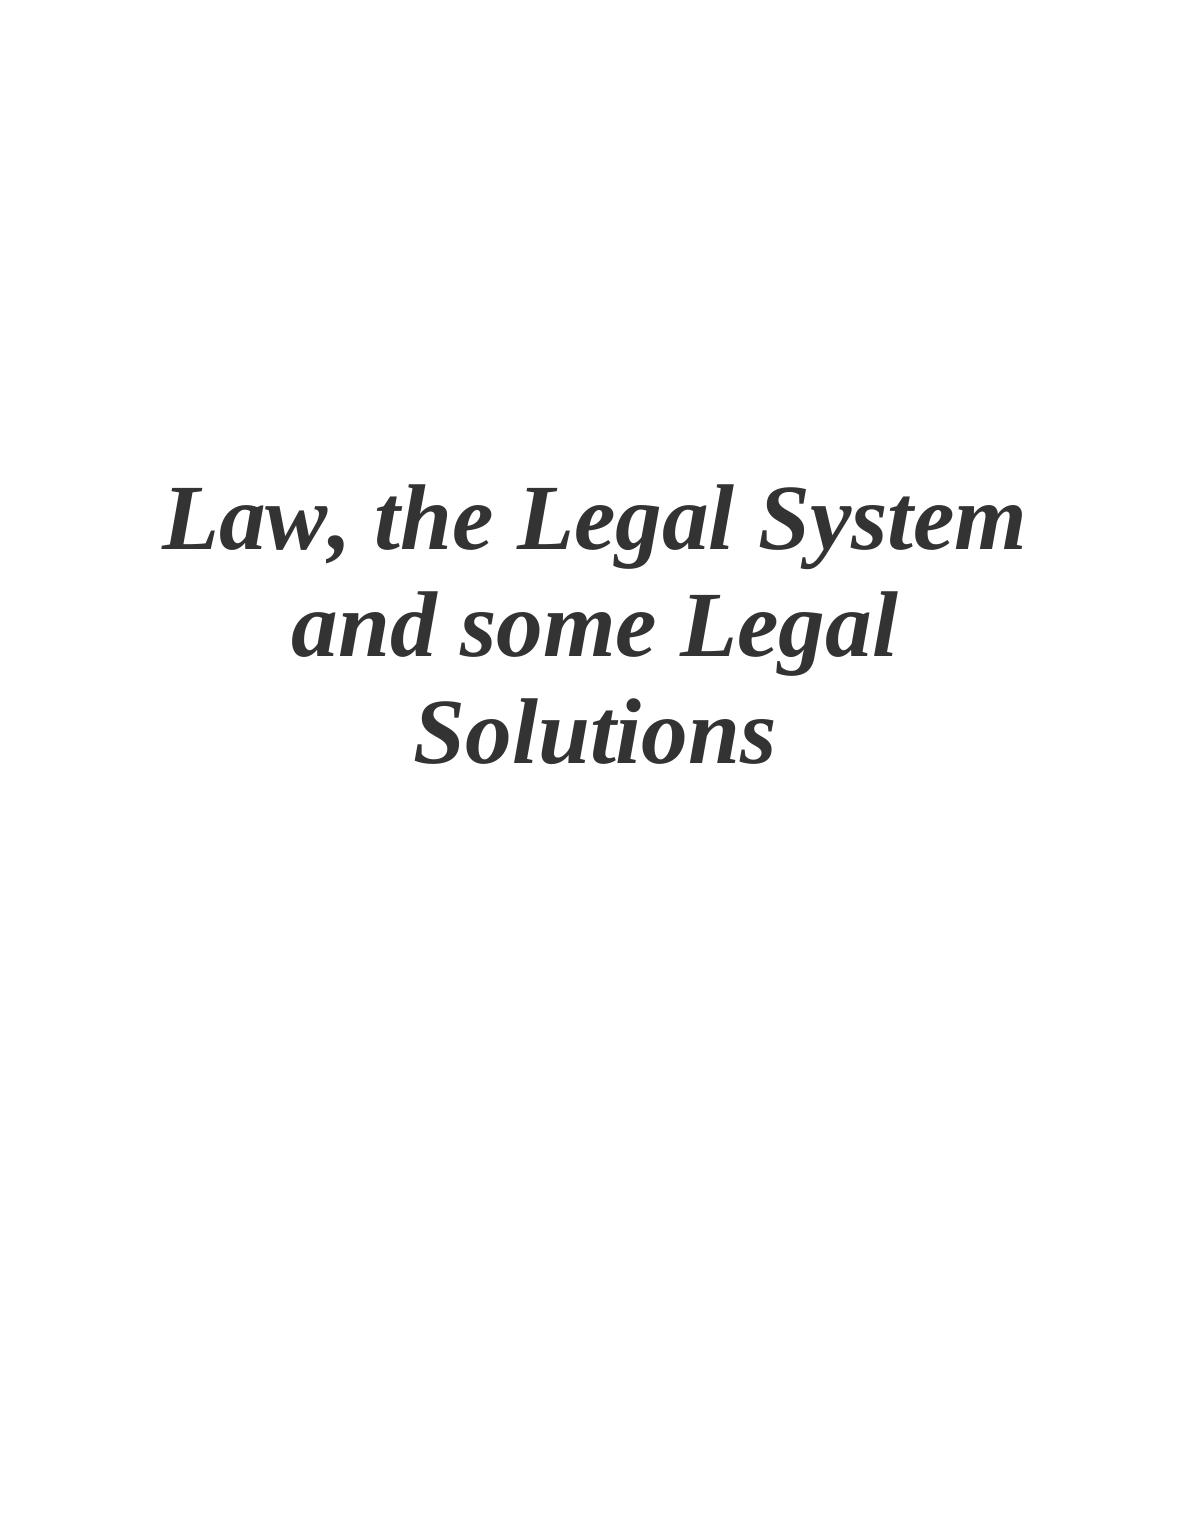 Law, Legal System, and Legal Solutions_1